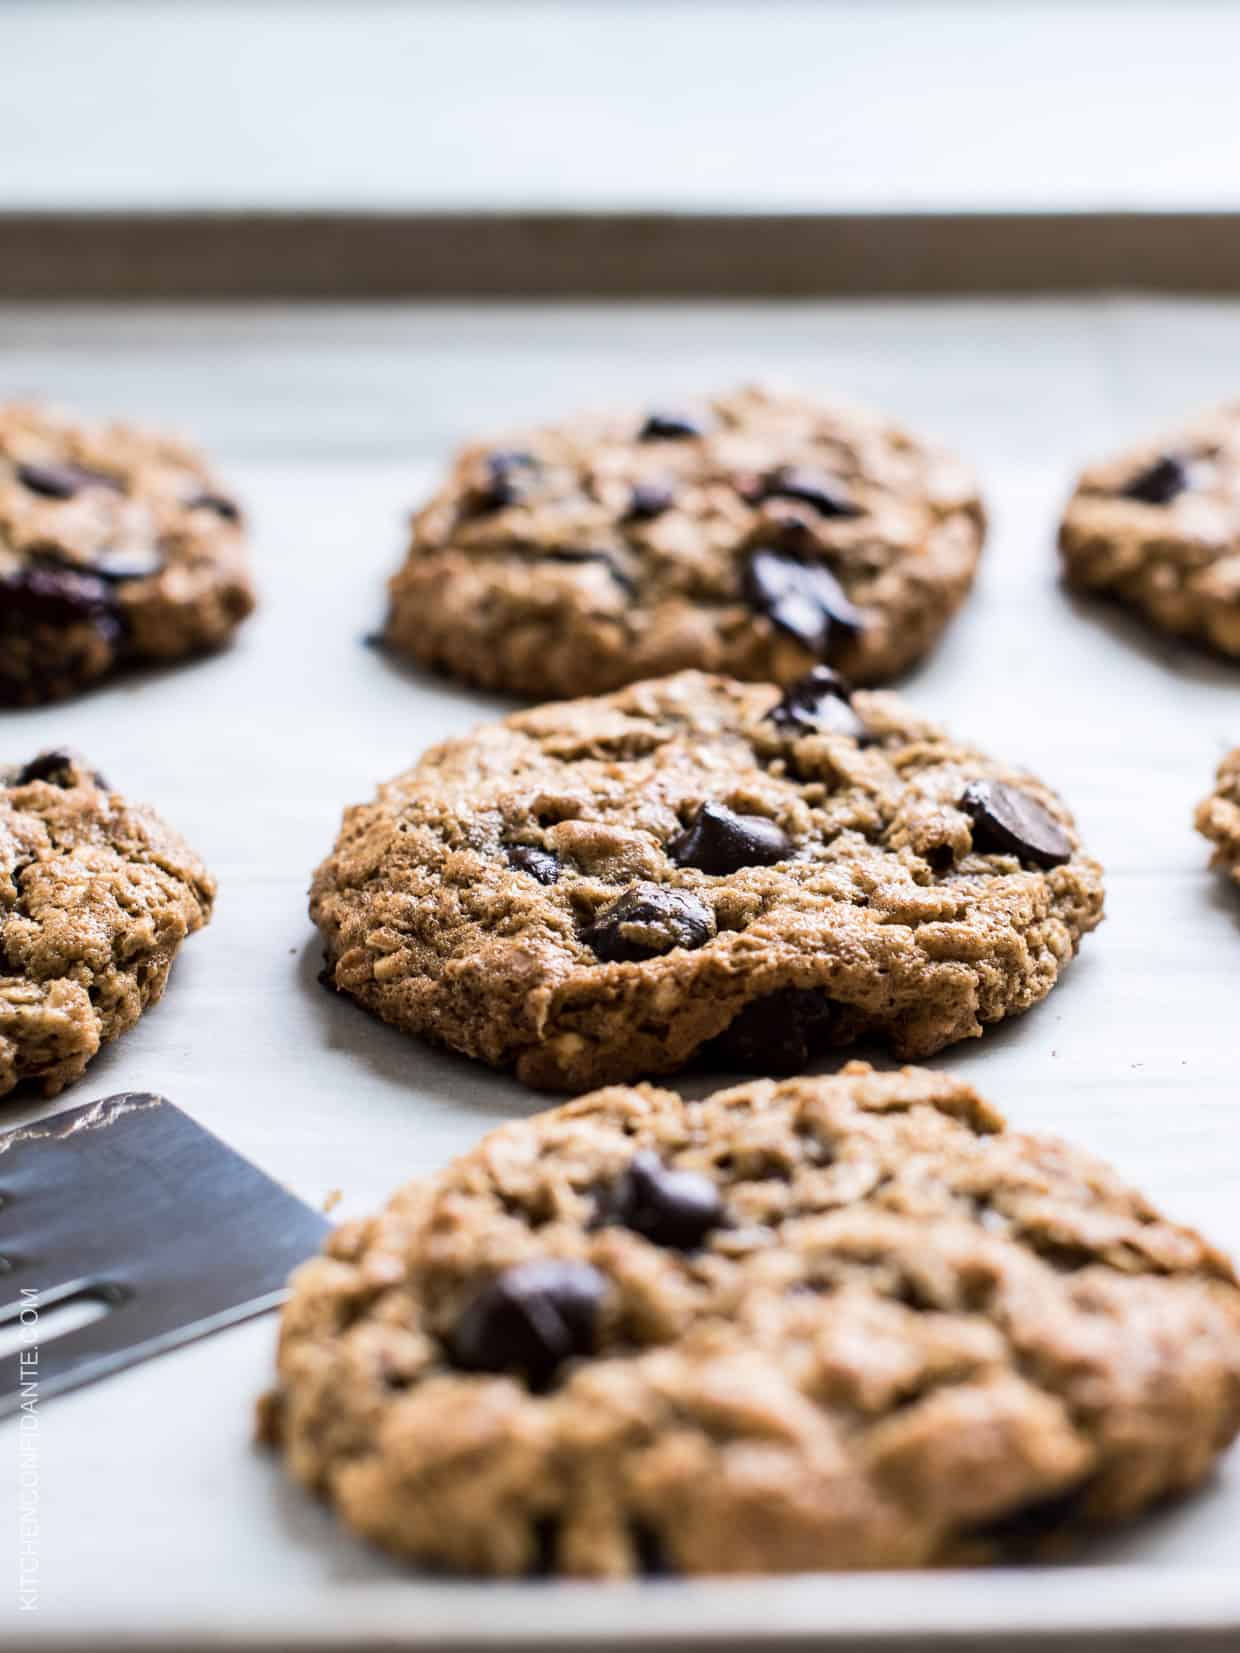 Chewy, gooey Almond Butter Oatmeal Cookies. Gluten-free and dairy-free recipe.